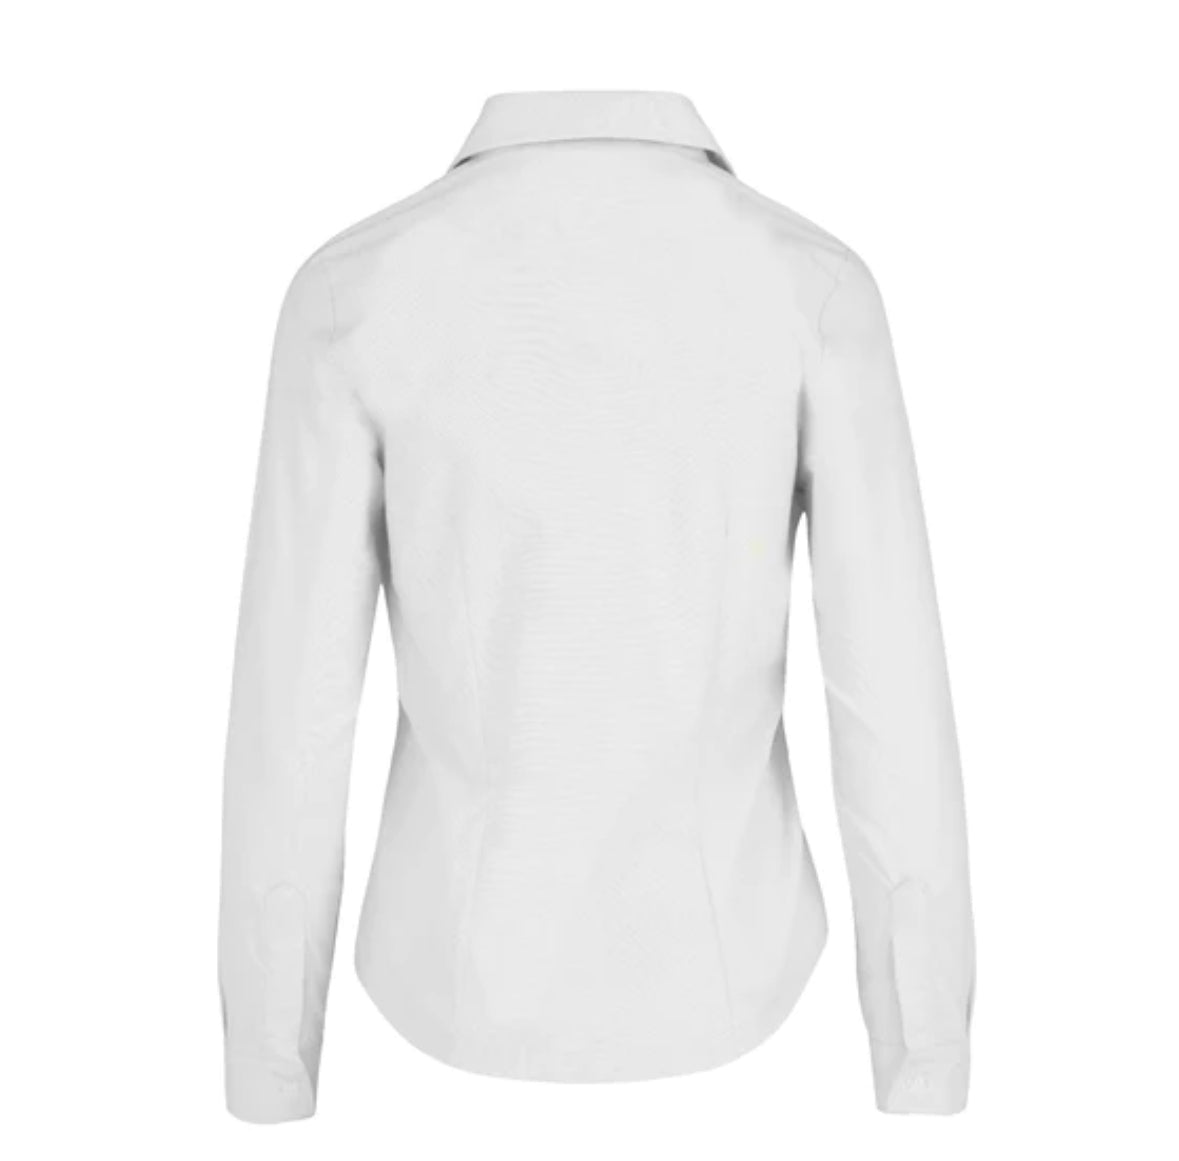 Mater Lakes Adult Long Sleeve Silhouette Oxford Shirt